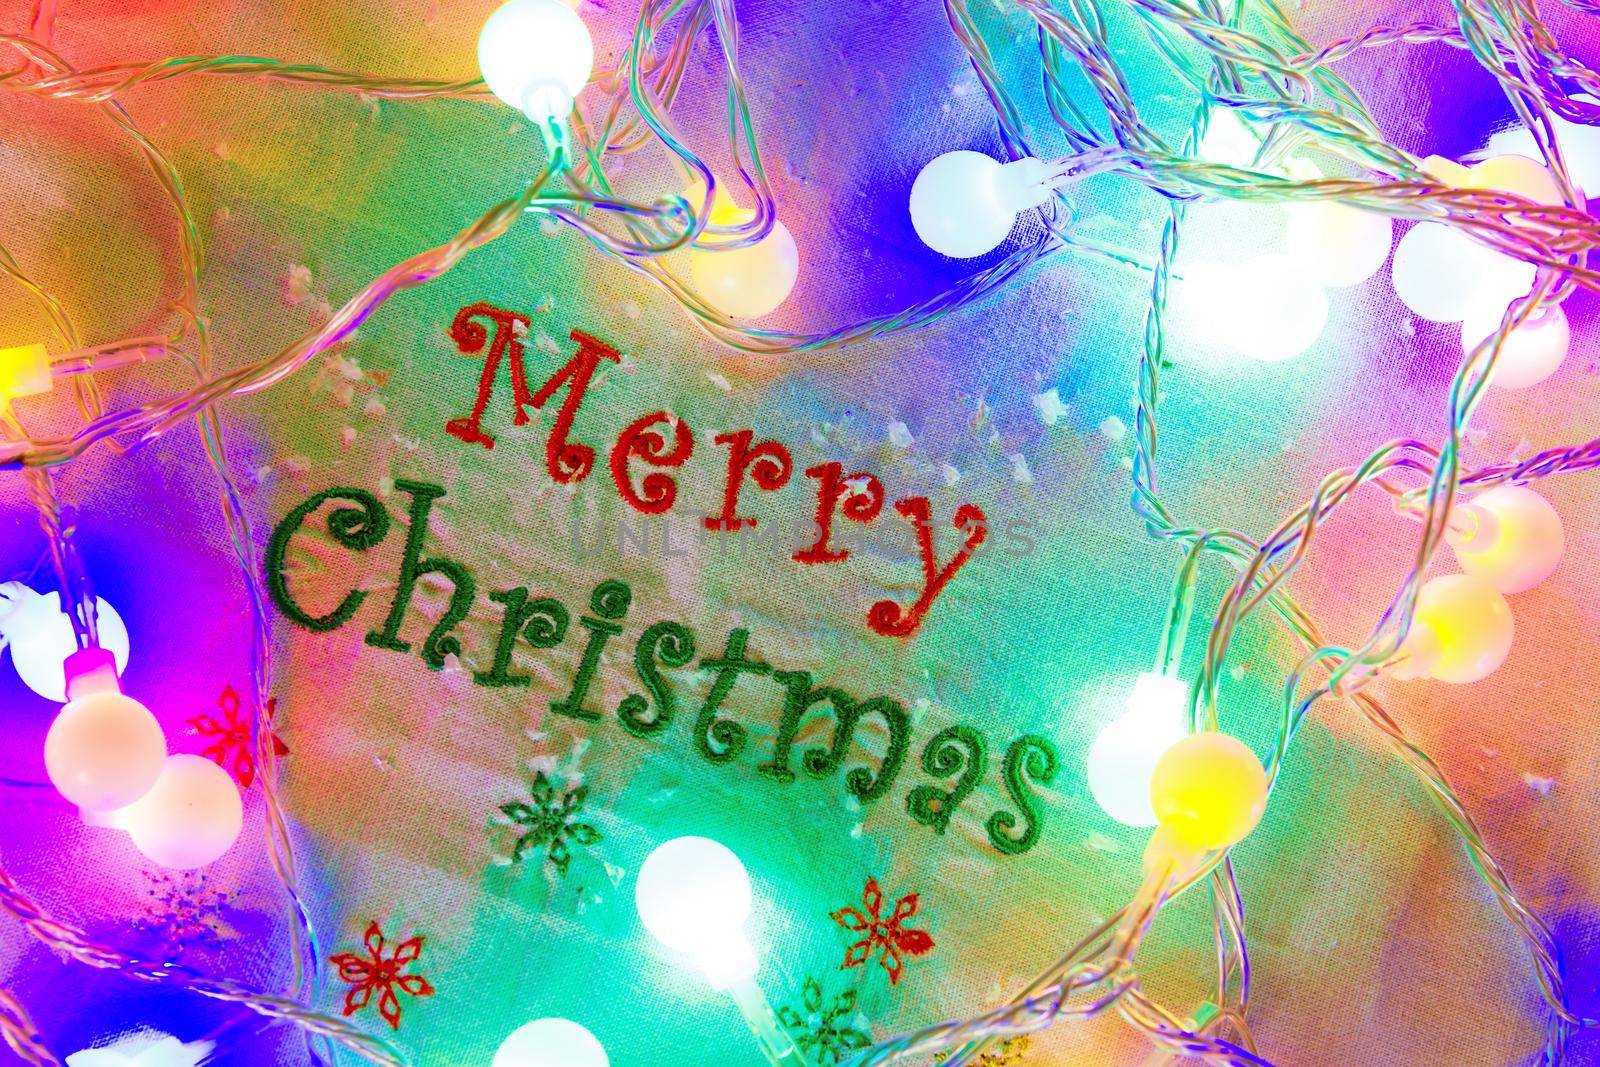 Merry Christmas Greeting with Glowing Colorful Christmas Lights